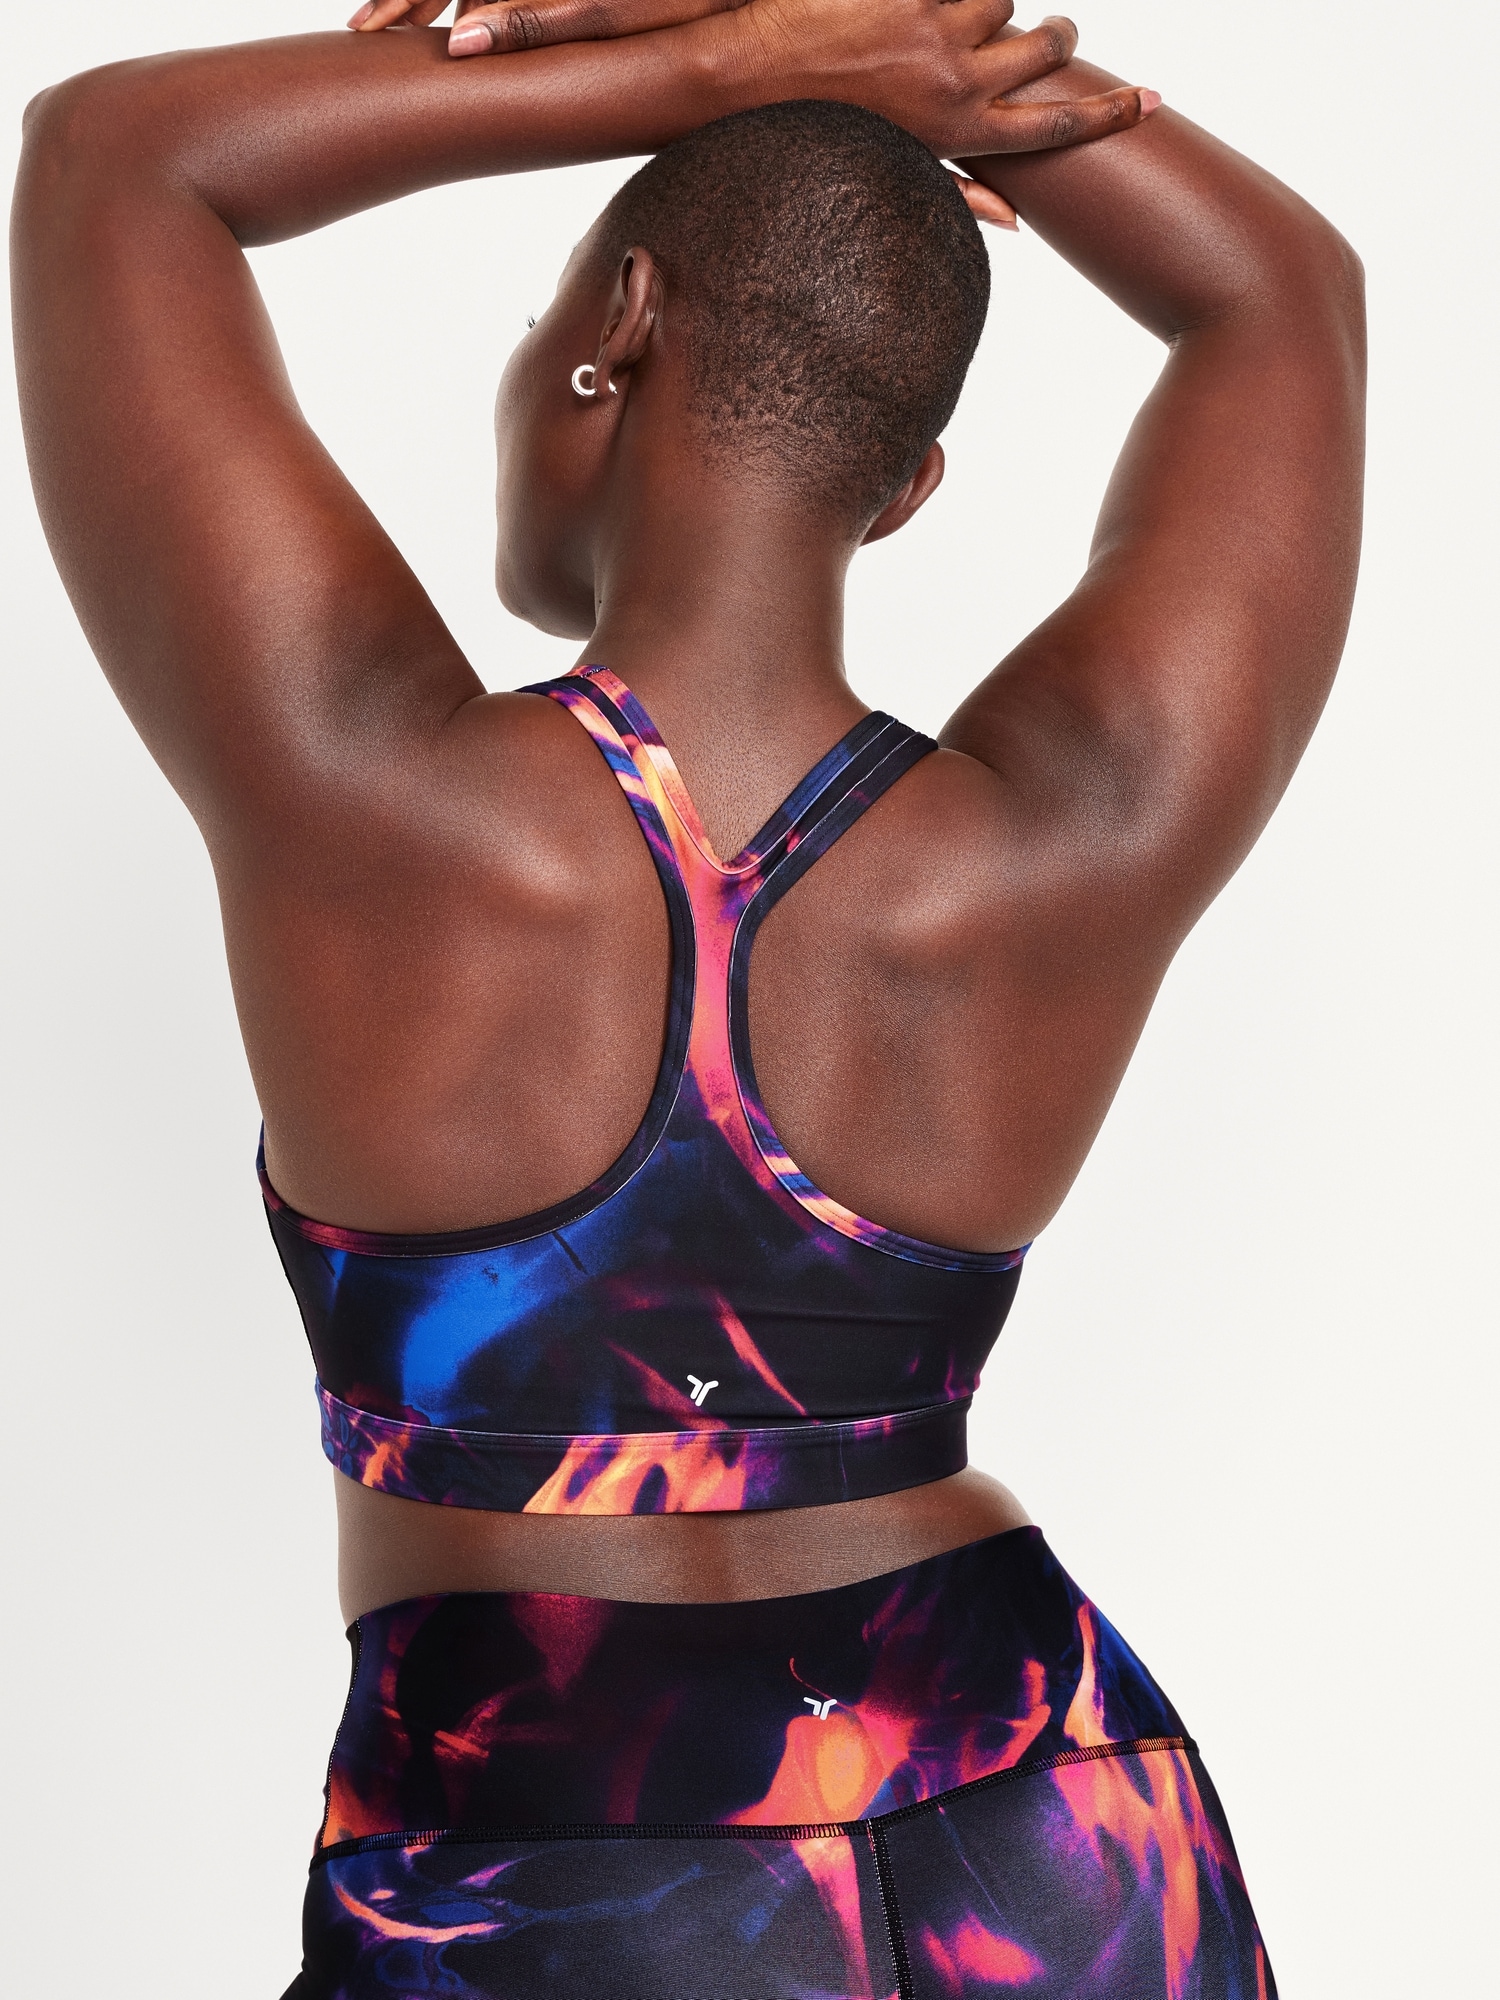 Bra Hack: Racerback Edition!  No bra to match all your needs? We